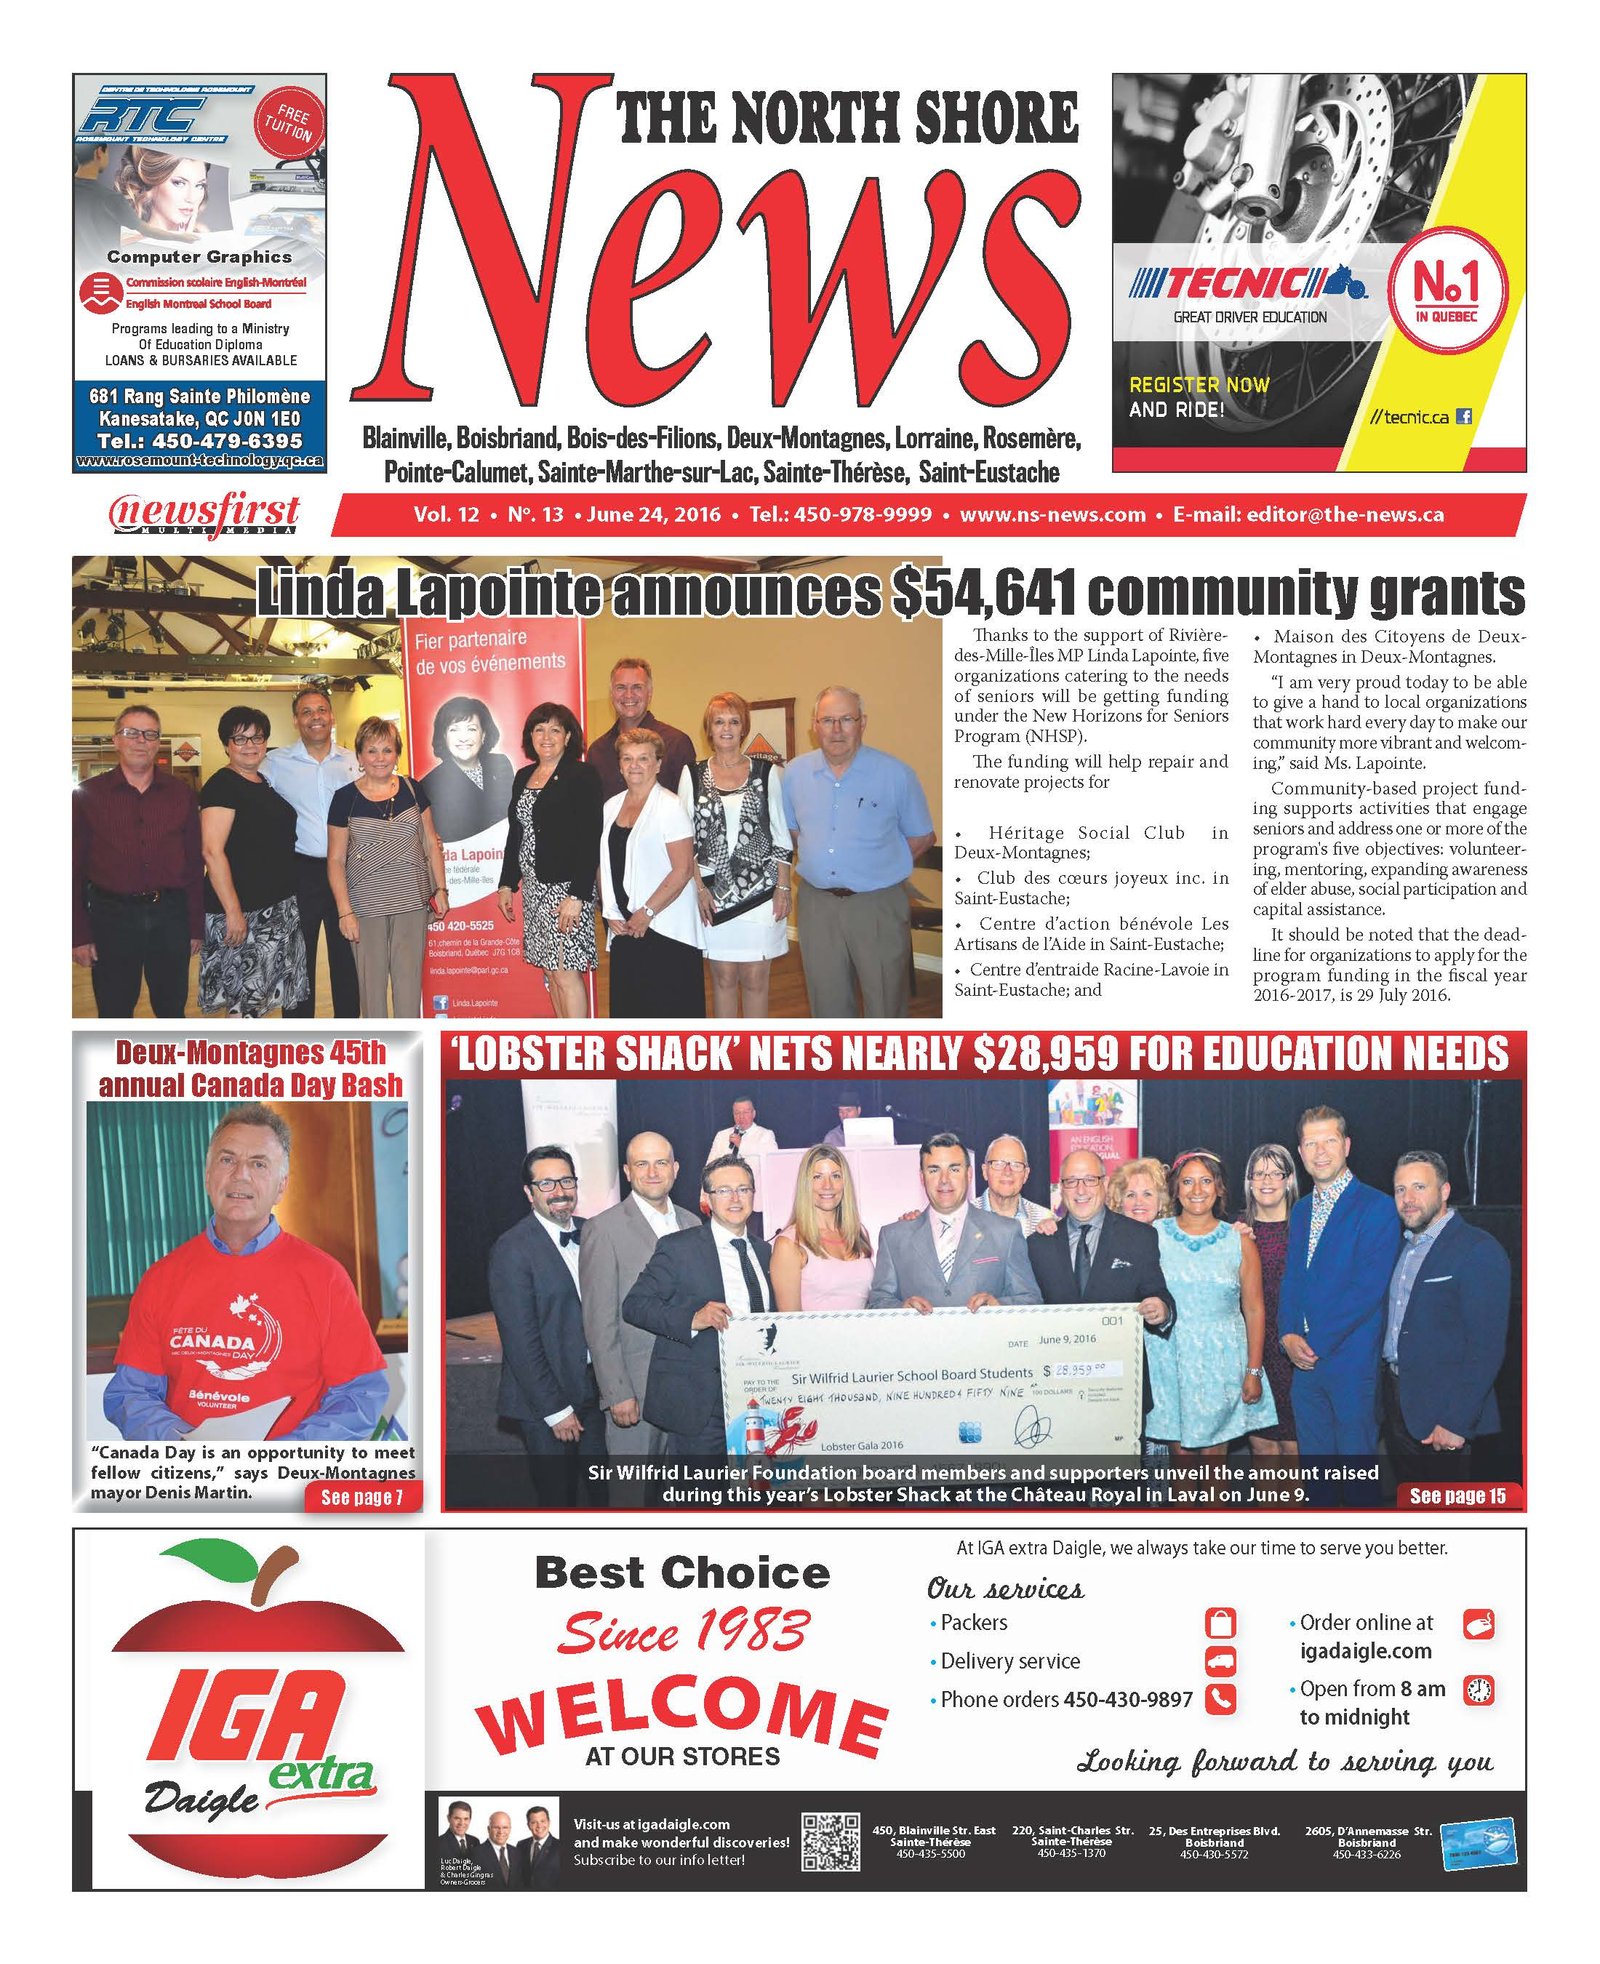 Front page image of the North Shore News Volume 12-13